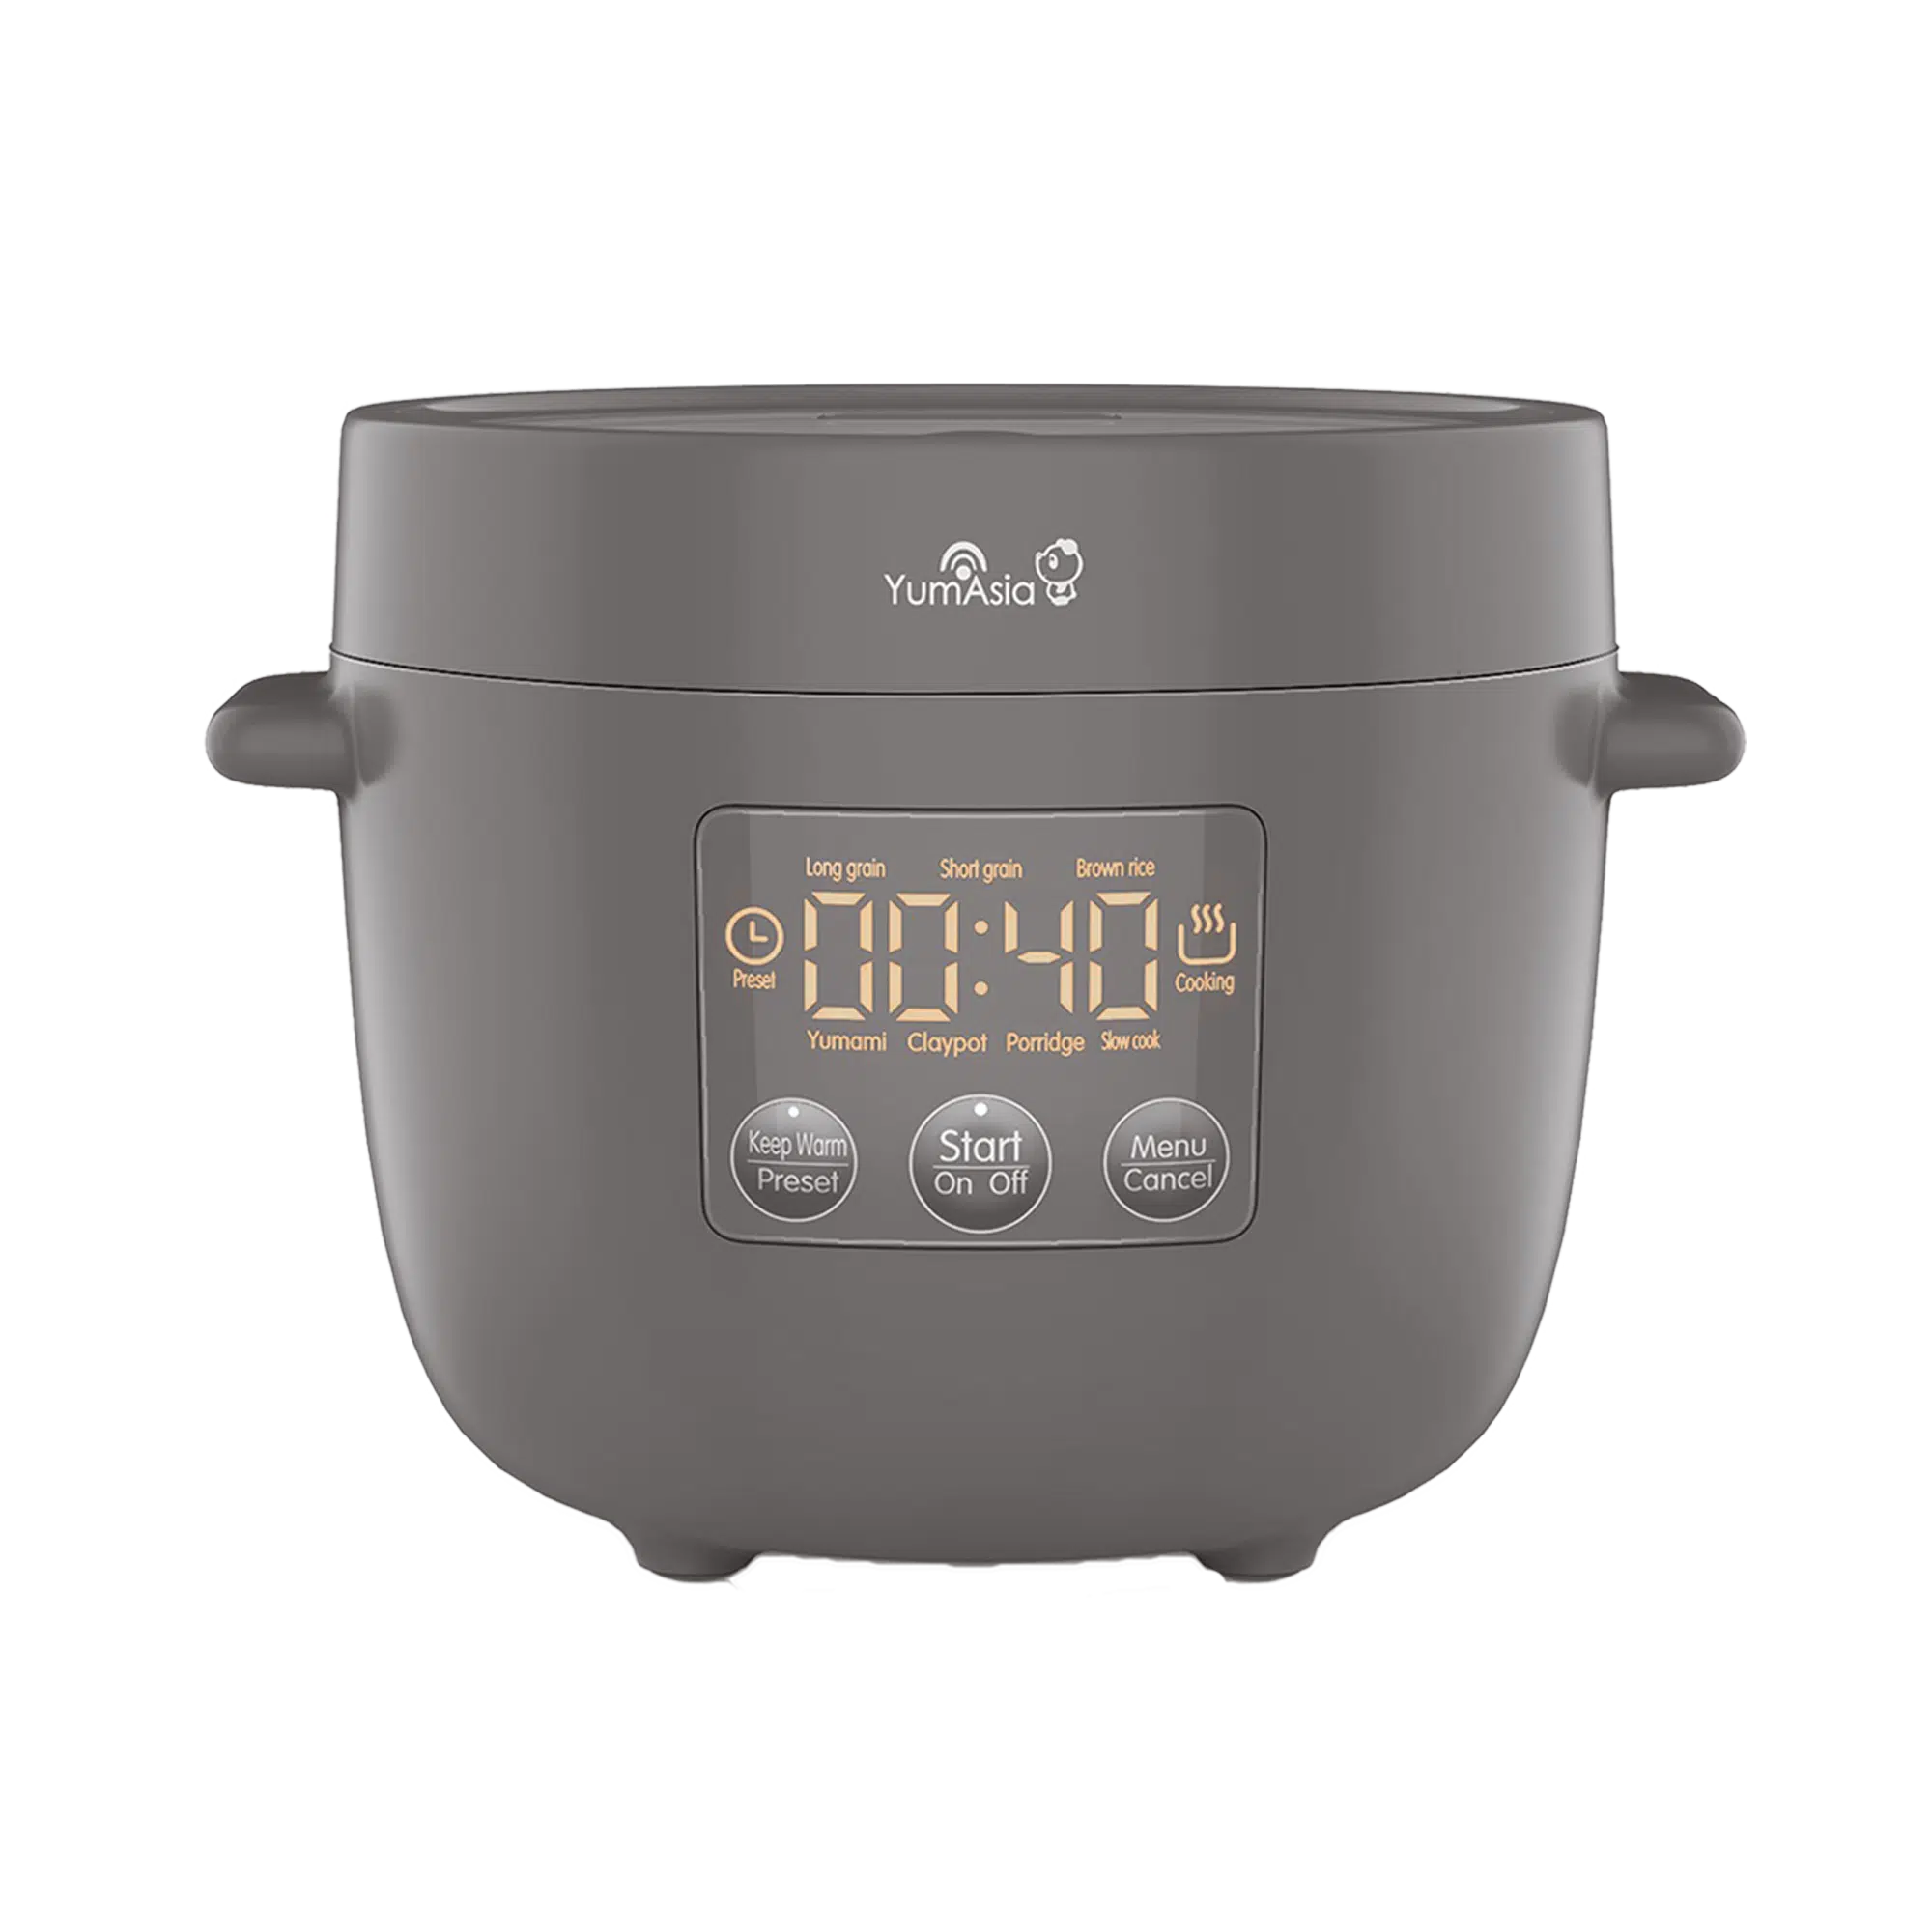 Yum Asia - Another exciting announcement from Yum Asia, the rice cooker  experts 🤗. Introducing Panda 🐼 - our Mini Fuzzy Logic Rice Cooker. Panda  completes Yum Asia's range of rice cookers